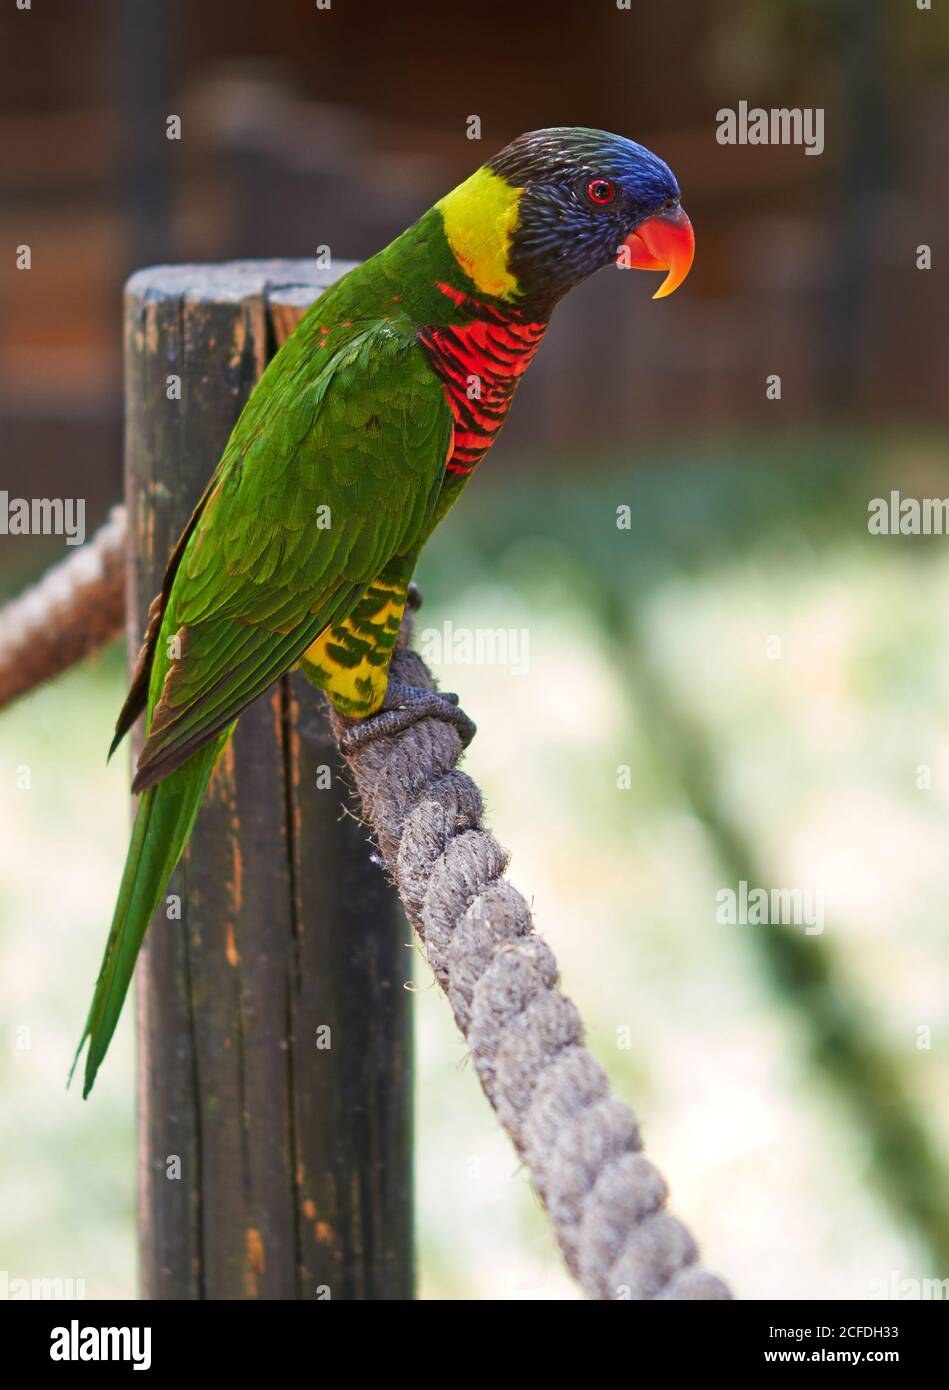 A green parrot with a red beak is sitting on a rope in a zoological park  Stock Photo - Alamy